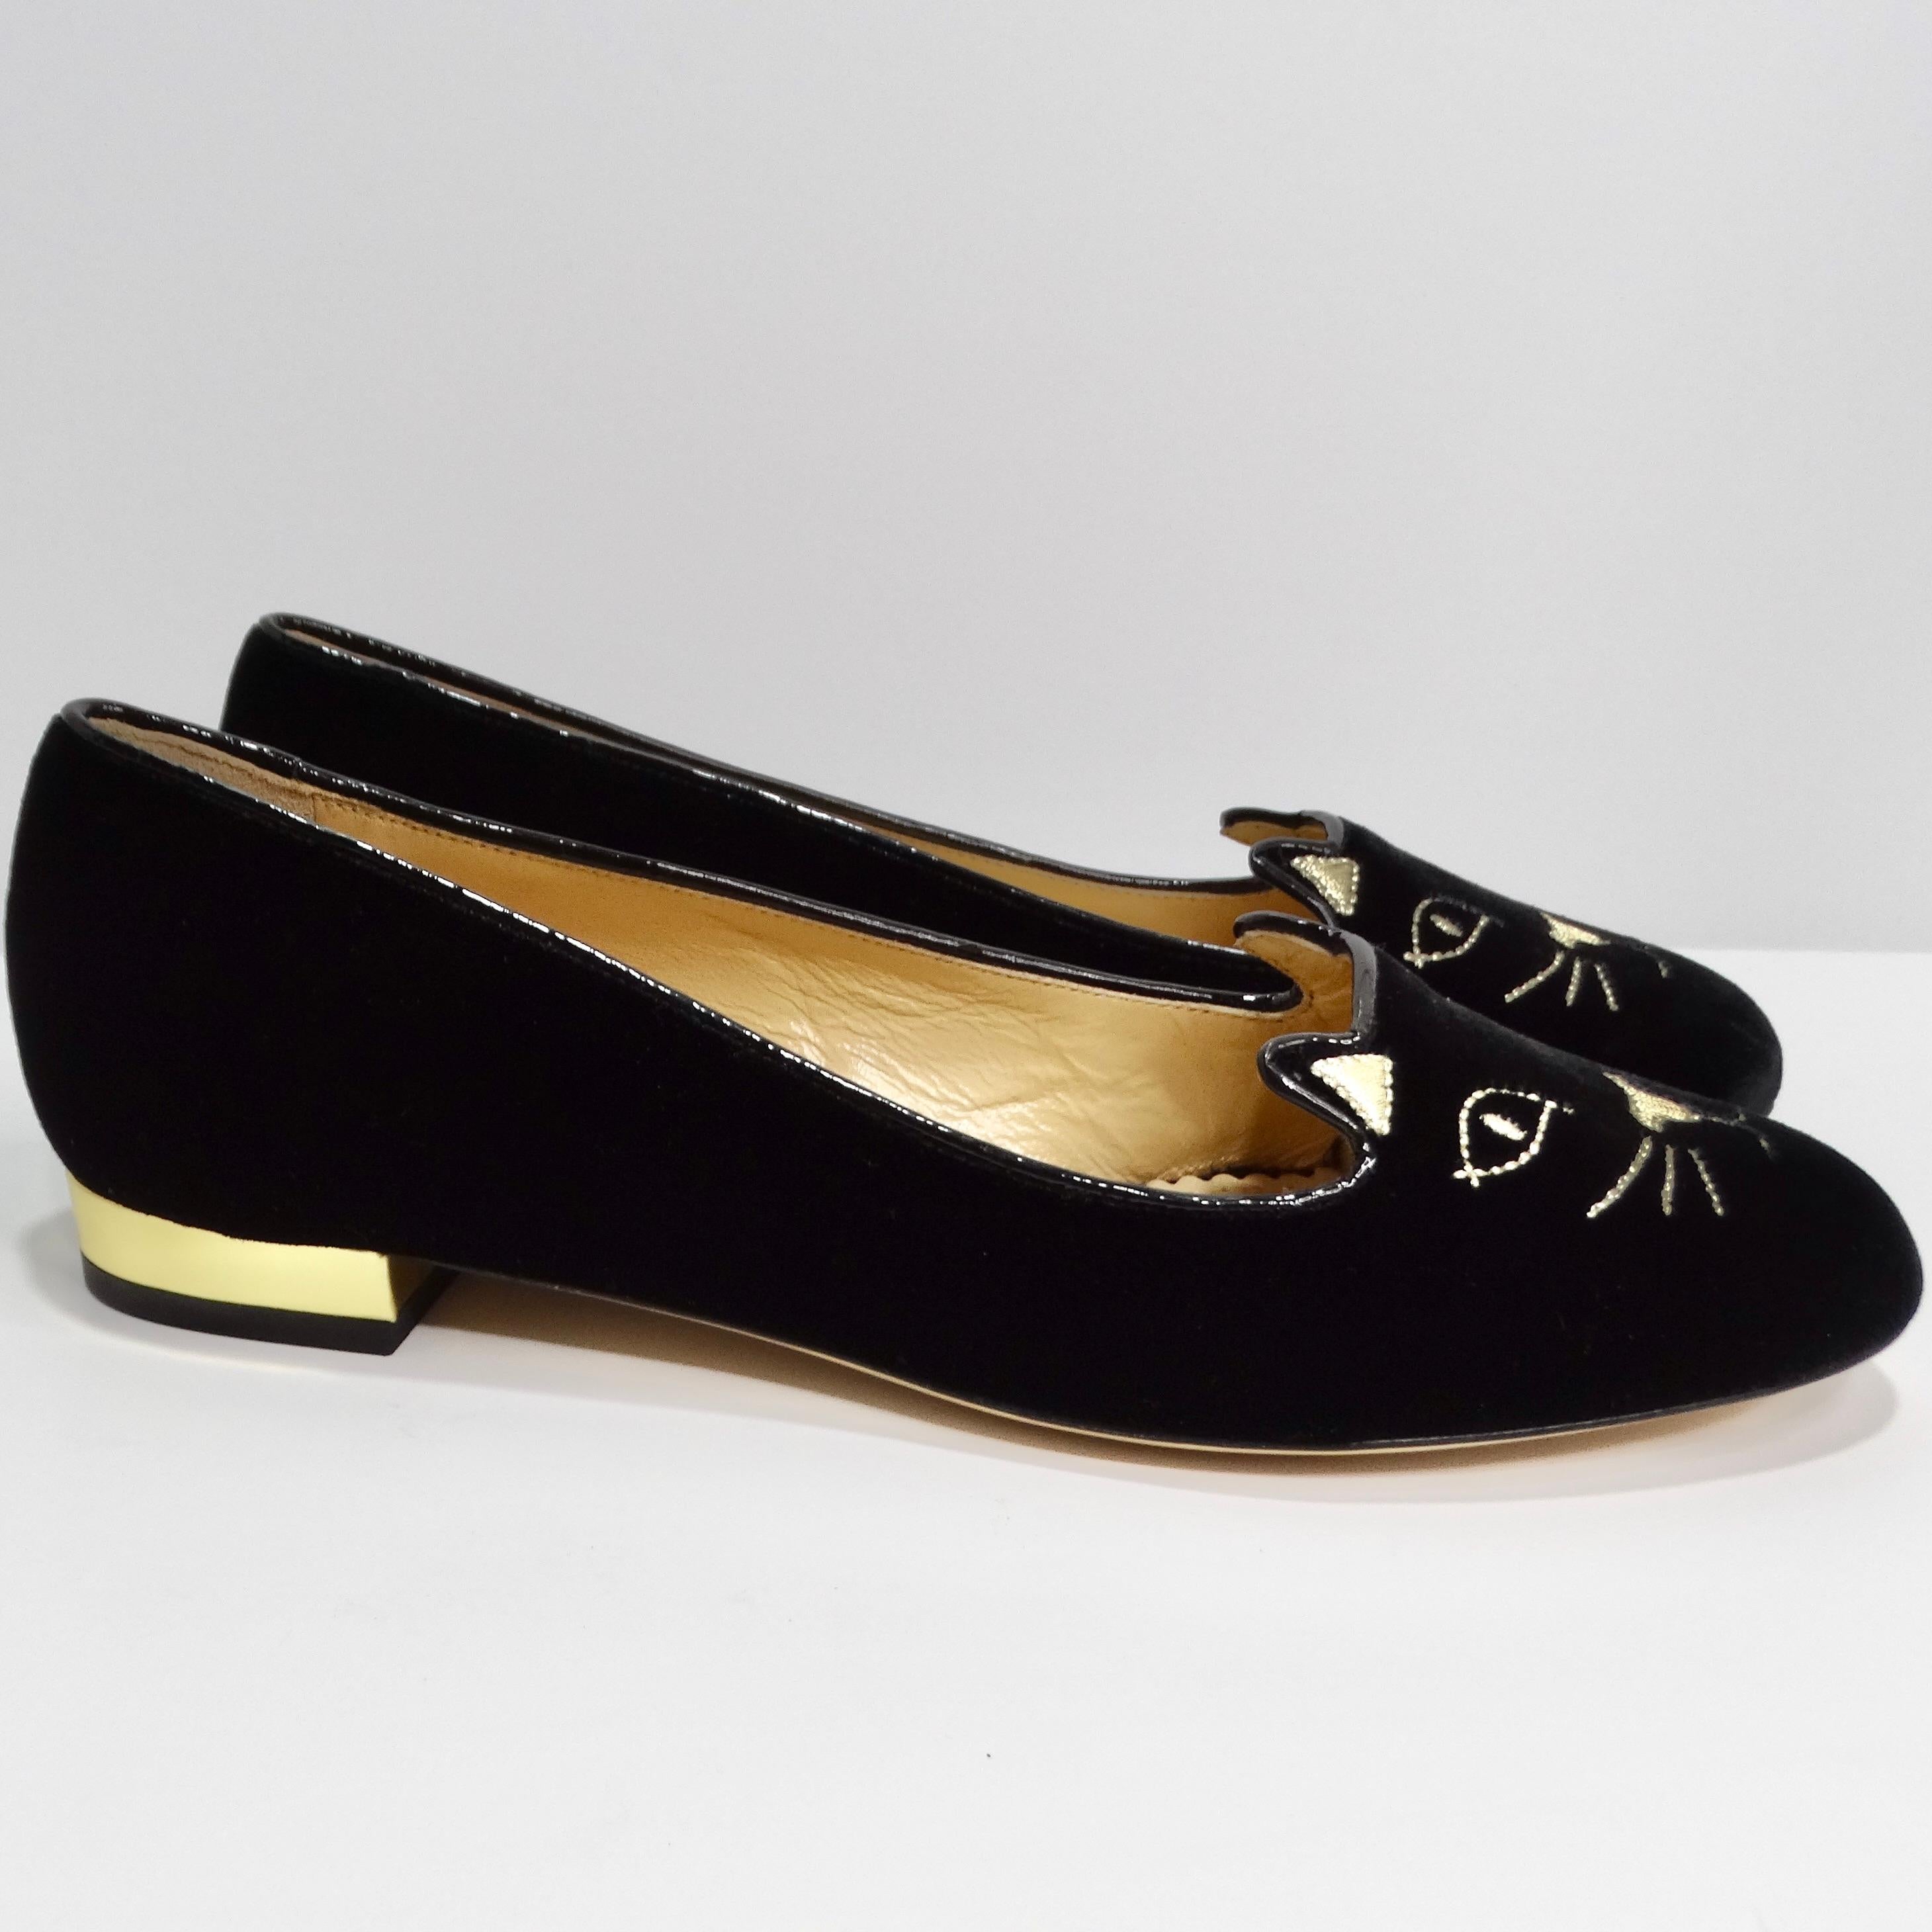 Charlotte Olympia - Chausssures brodées signées Kitty en vente 1